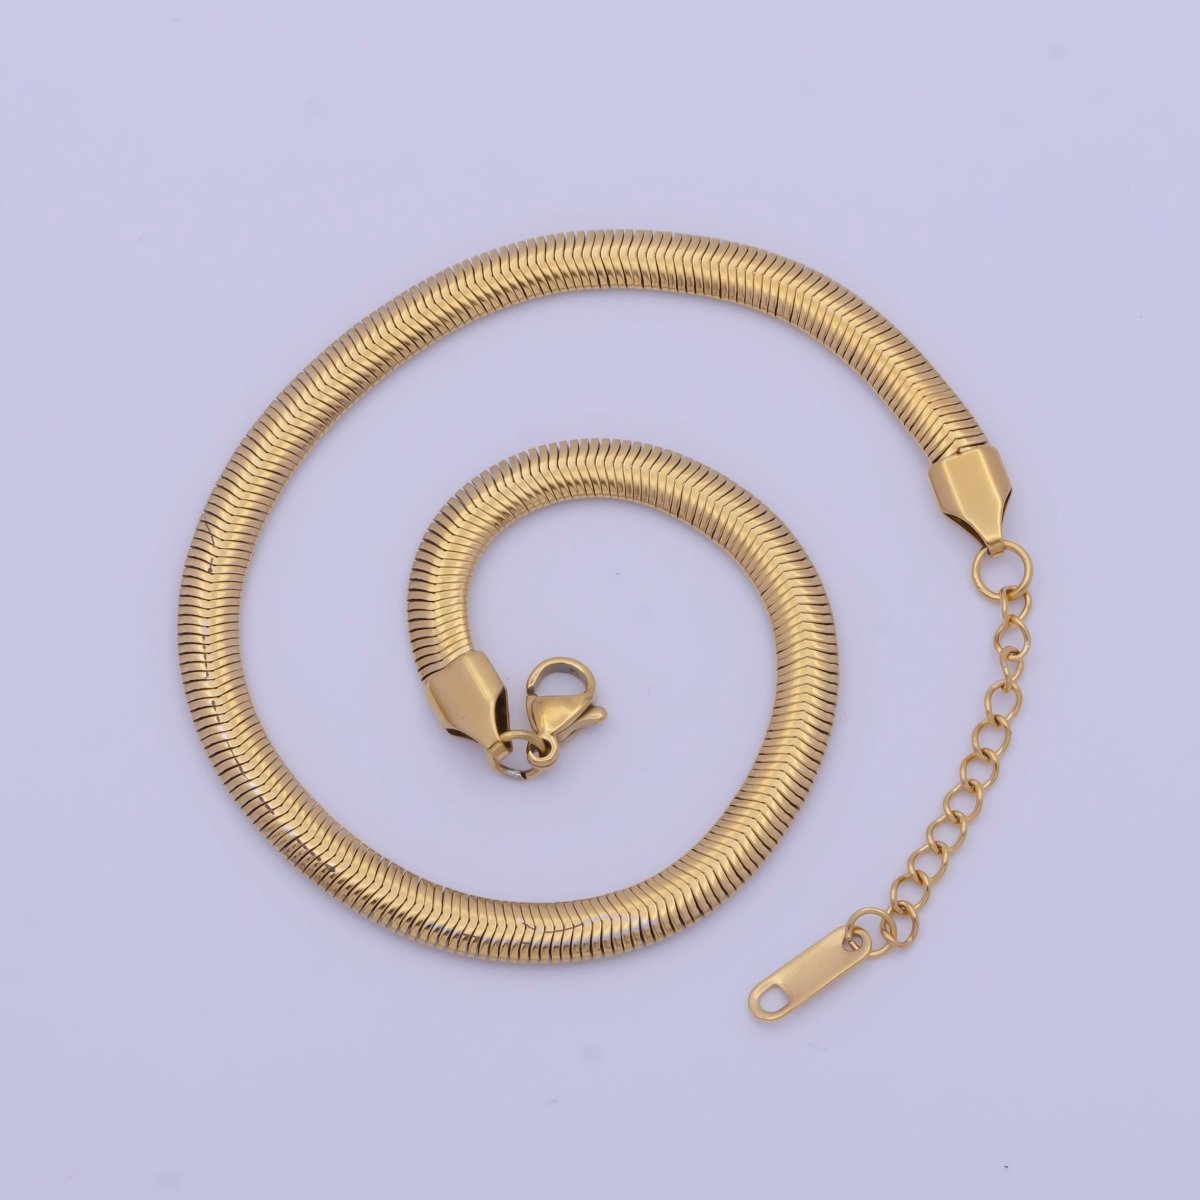 Snake Chain Anklet 9.5 Inch + 1.5" extender Length in 24k Gold Filled Snake Chain | WA-1140 WA-1141 Clearance Pricing - DLUXCA